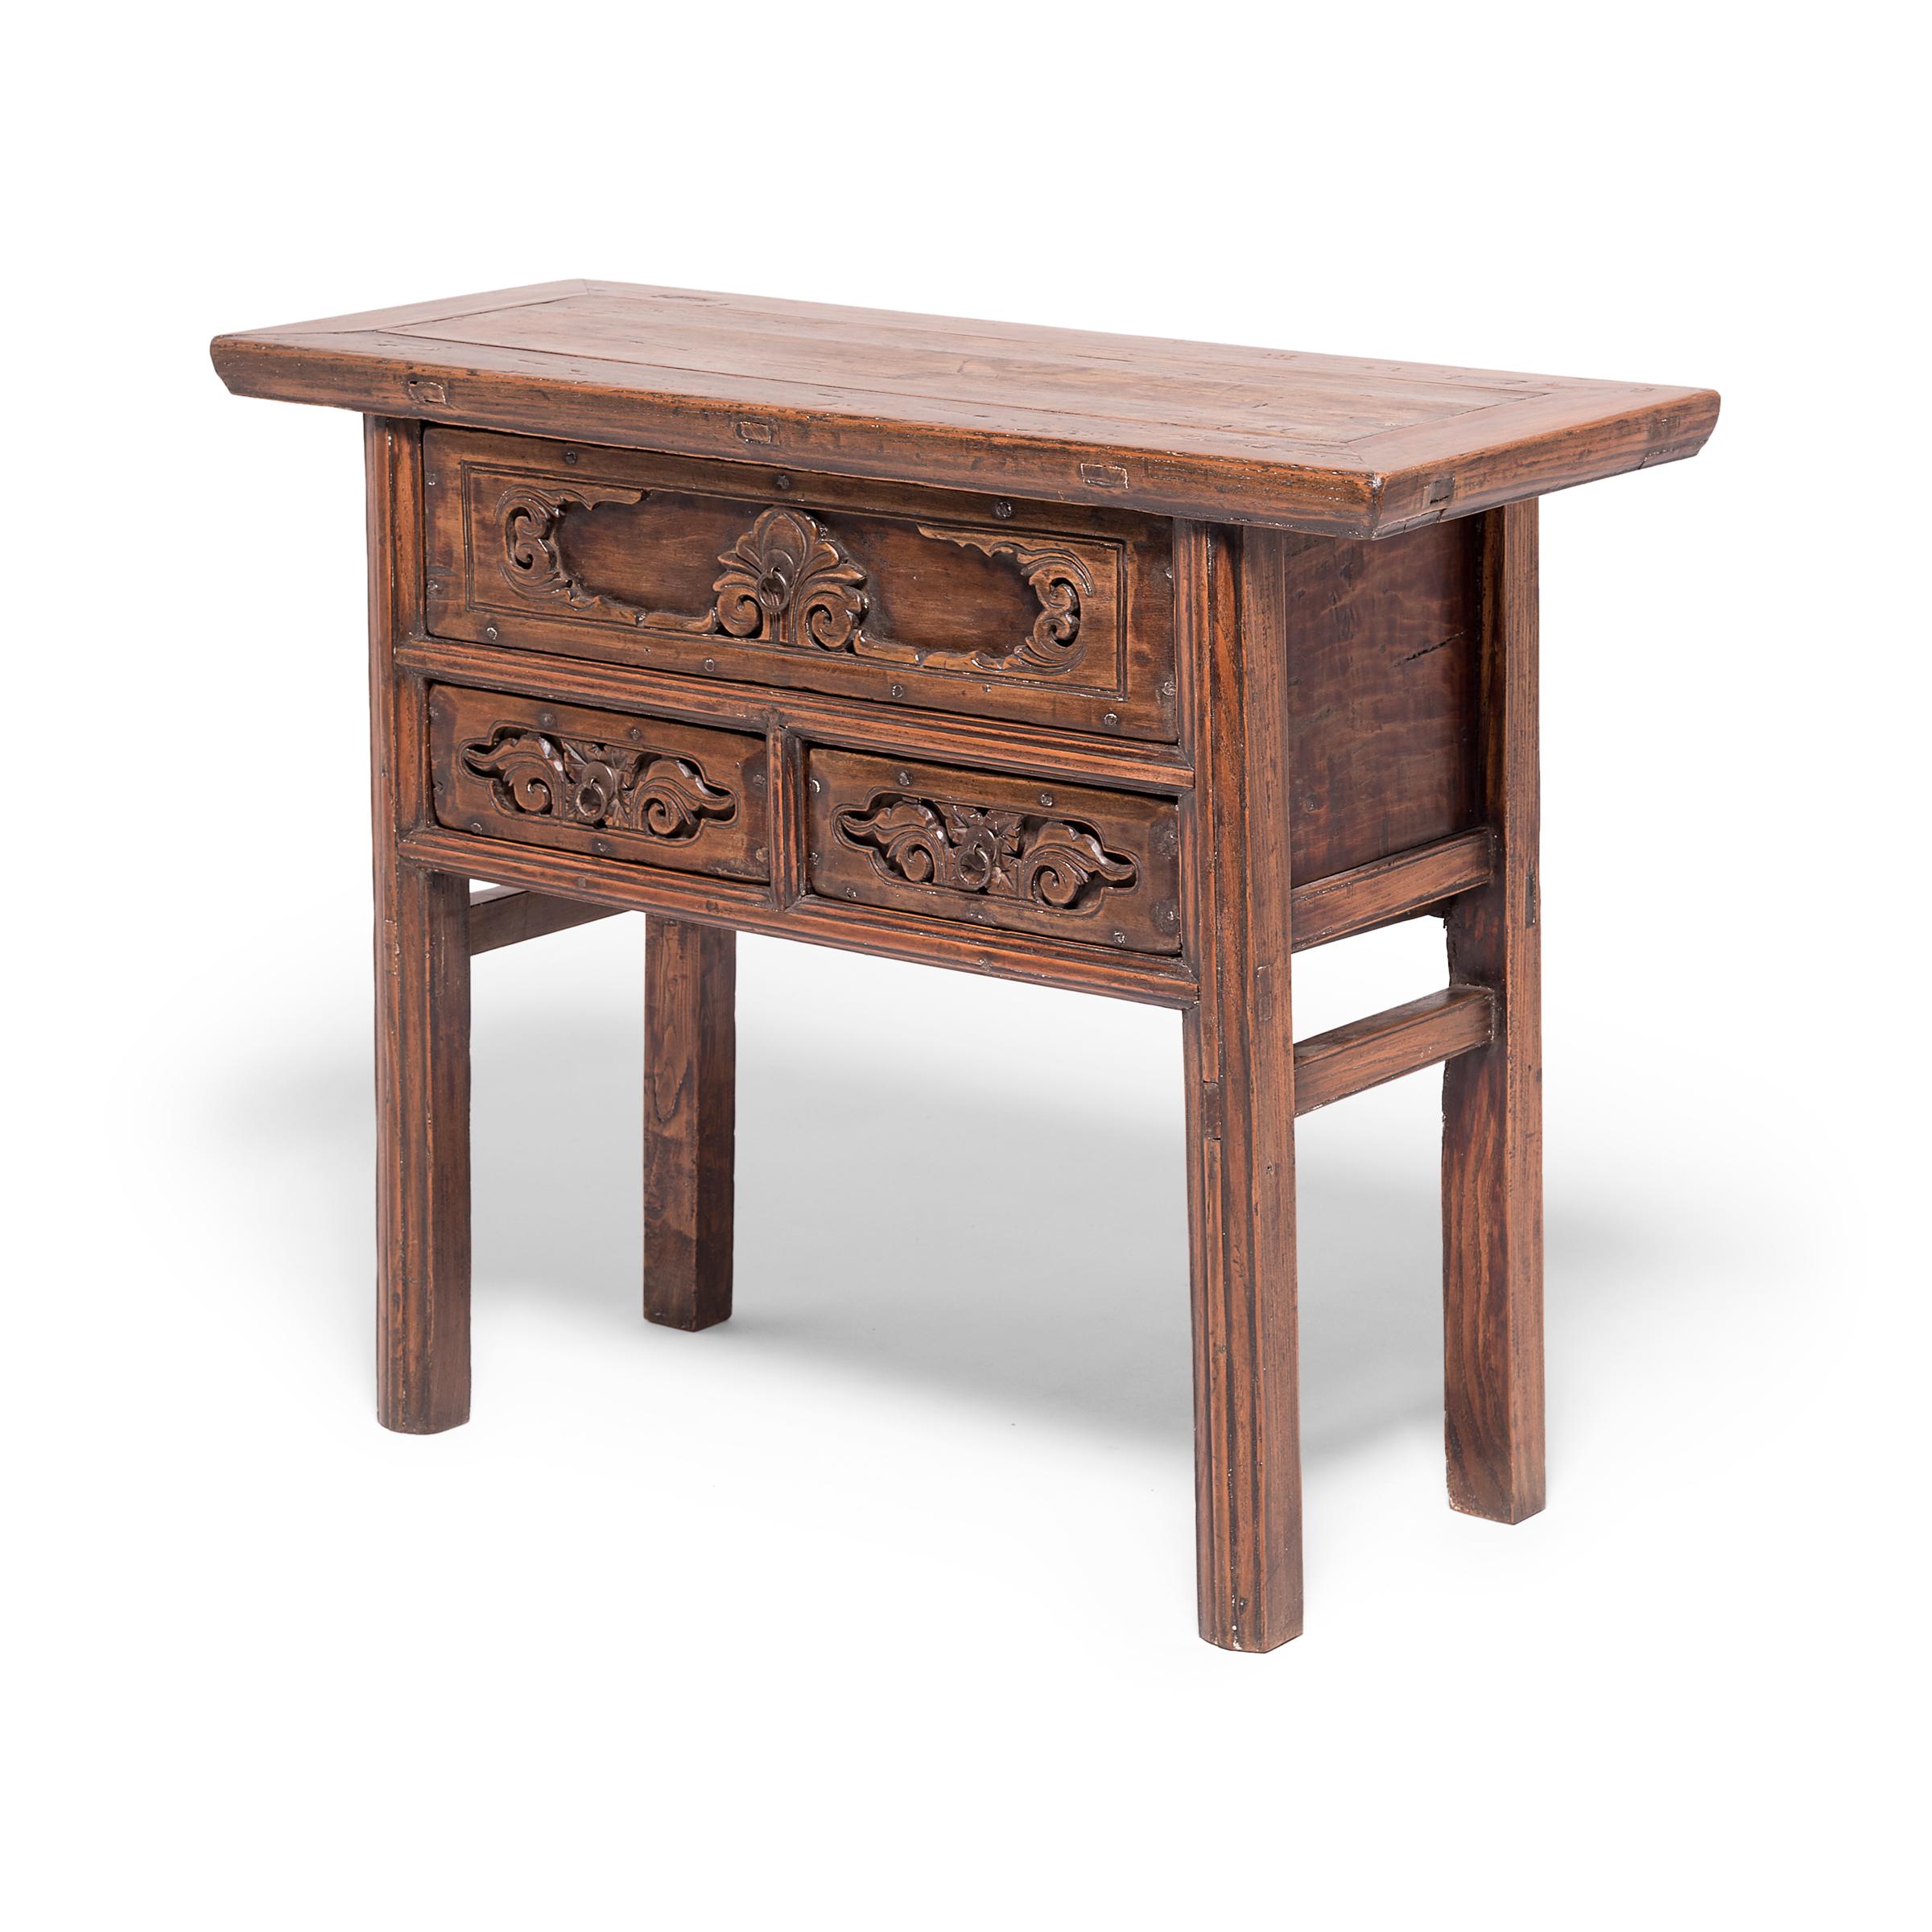 Originally used as an altar table, this beautifully carved table displays intricate flower motifs on its three drawers. Made of northern elmwood in China's Shanxi province, the 19th century console table balances its intricate ornamentation with